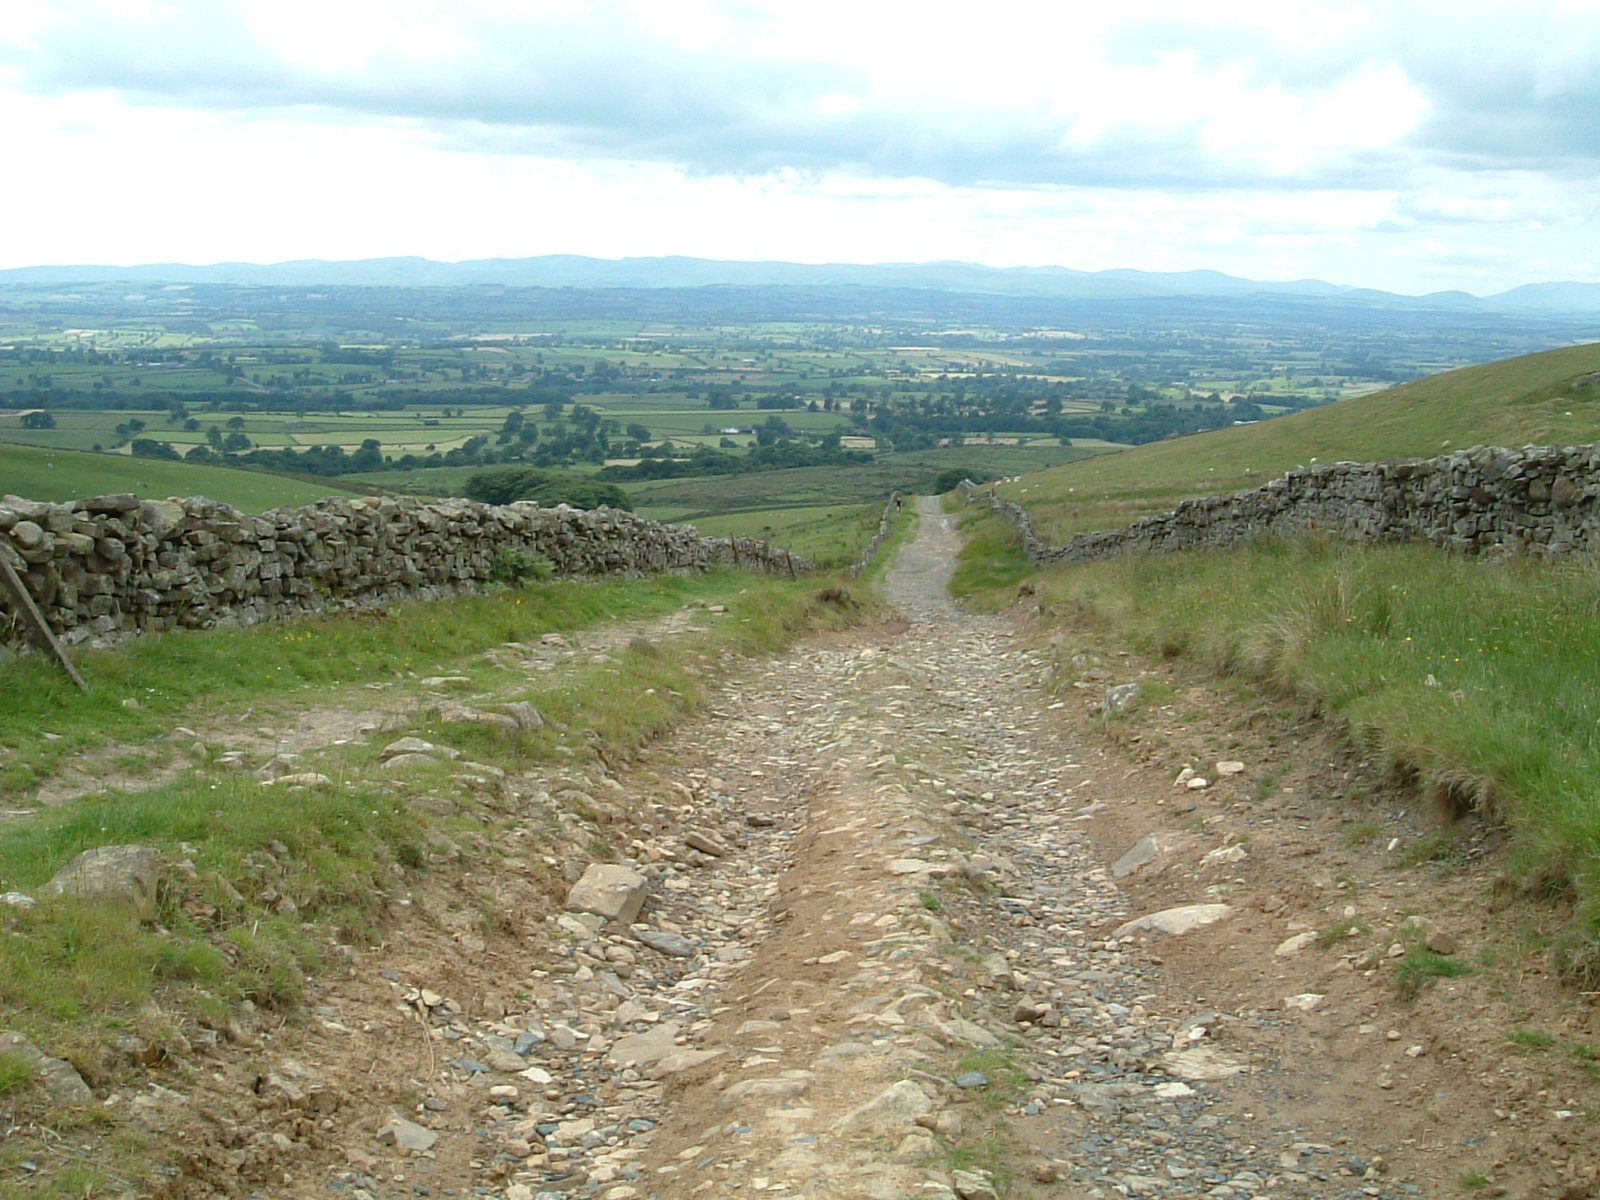 The descent into Dufton